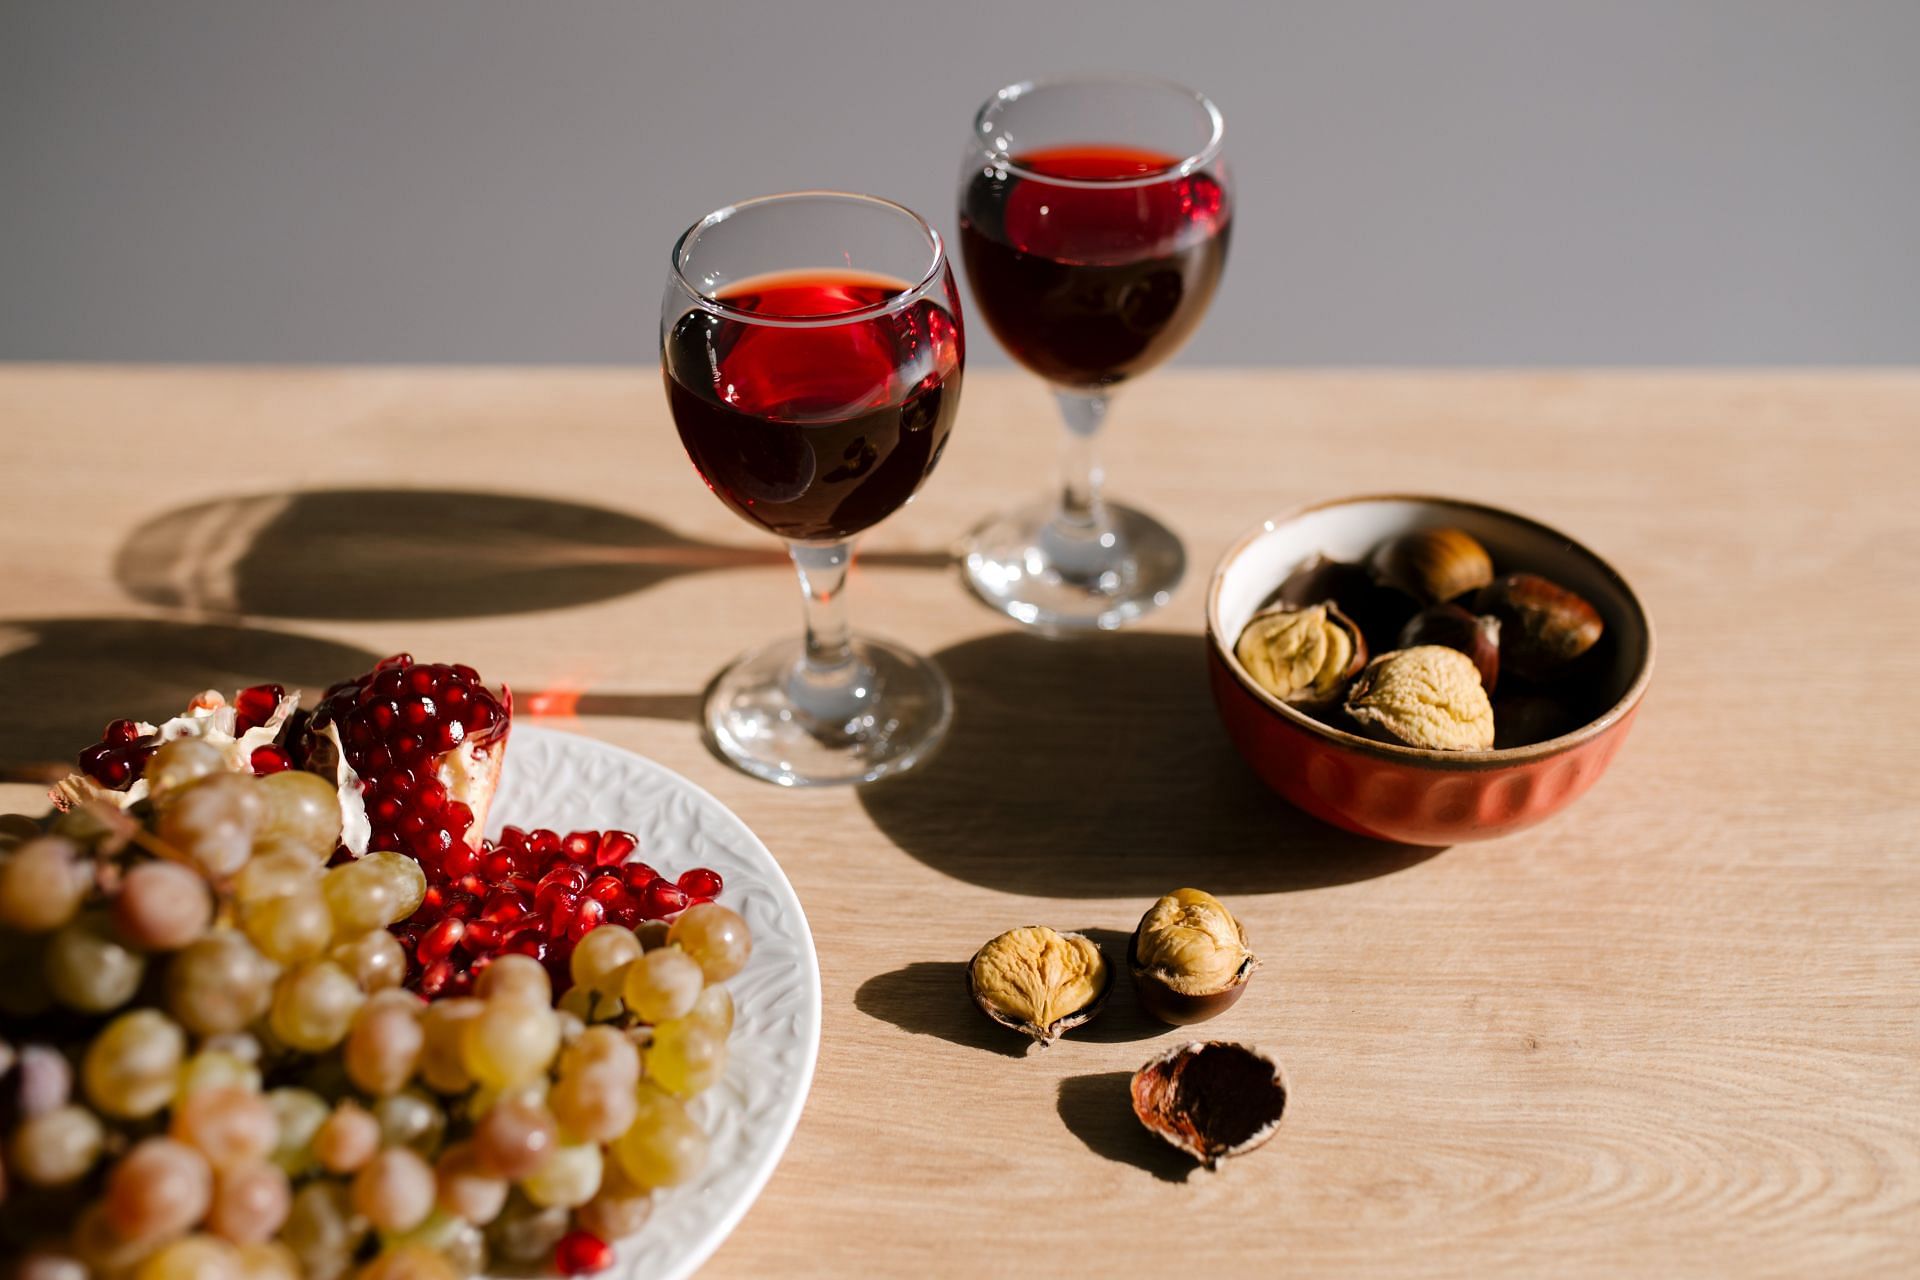 Red wine is made by fermenting dark colored grapes with their skins (Image via Pexels/Julia Volk)